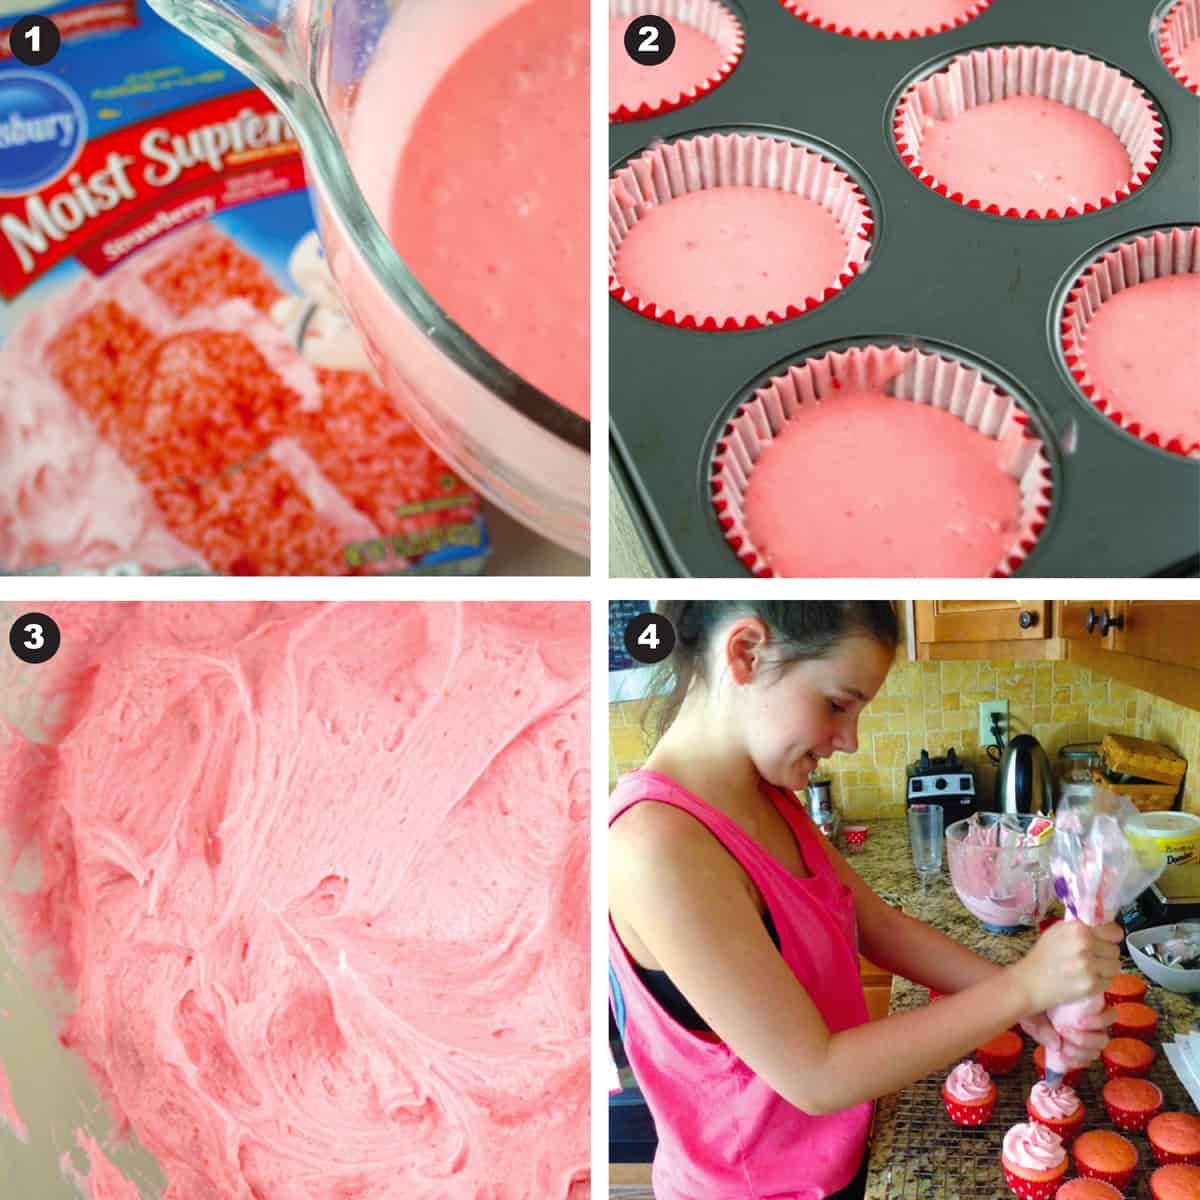 Four pictures showing the process of making strawberry cupcakes.